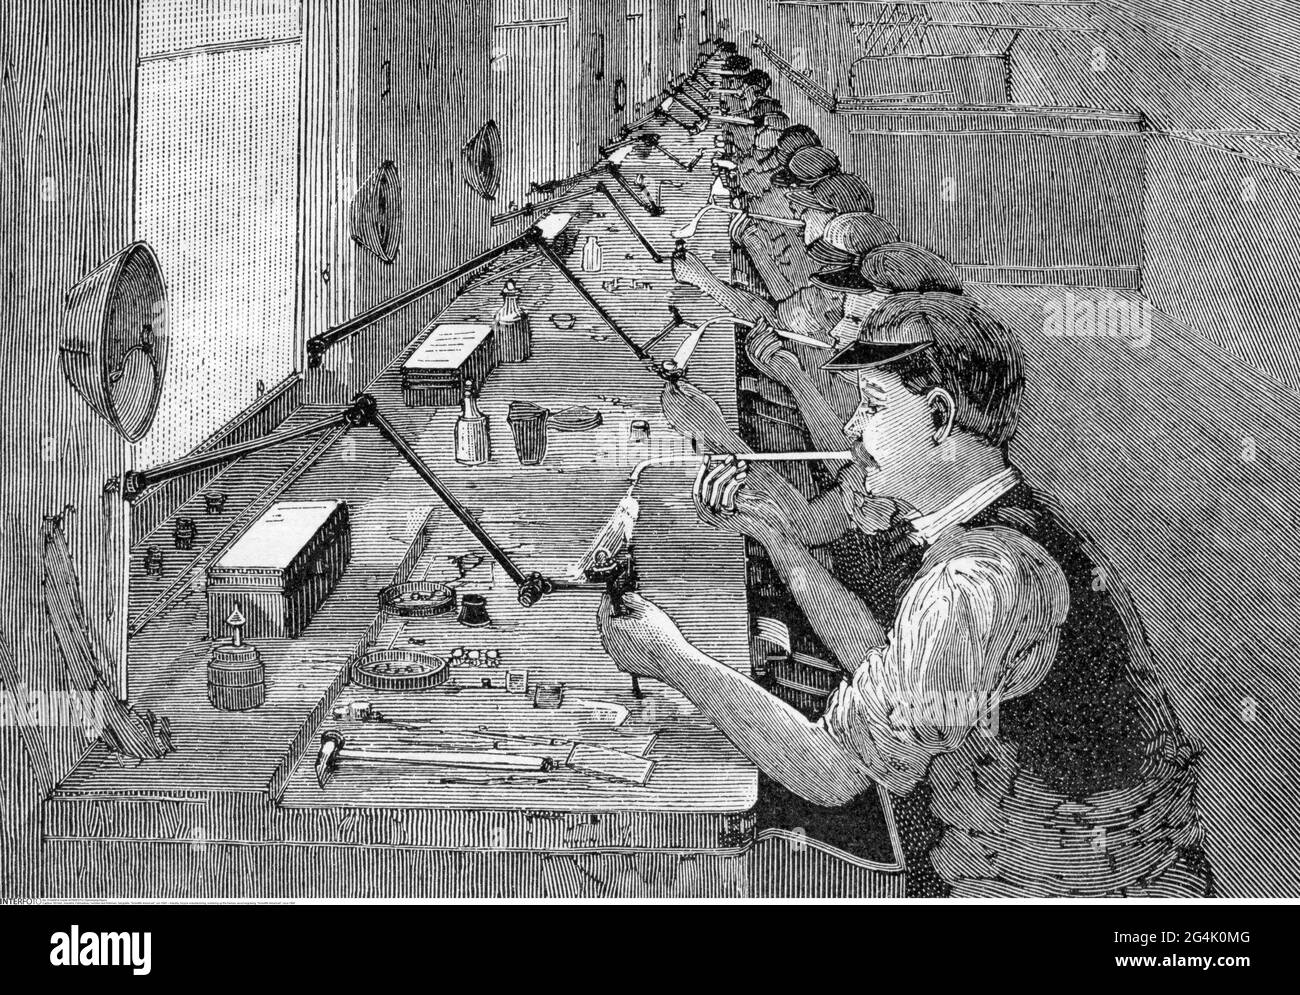 industry, bicycle manufactoring, soldering up the frames, wood engraving, 'Scientific American', circa 1895, ARTIST'S COPYRIGHT HAS NOT TO BE CLEARED Stock Photo